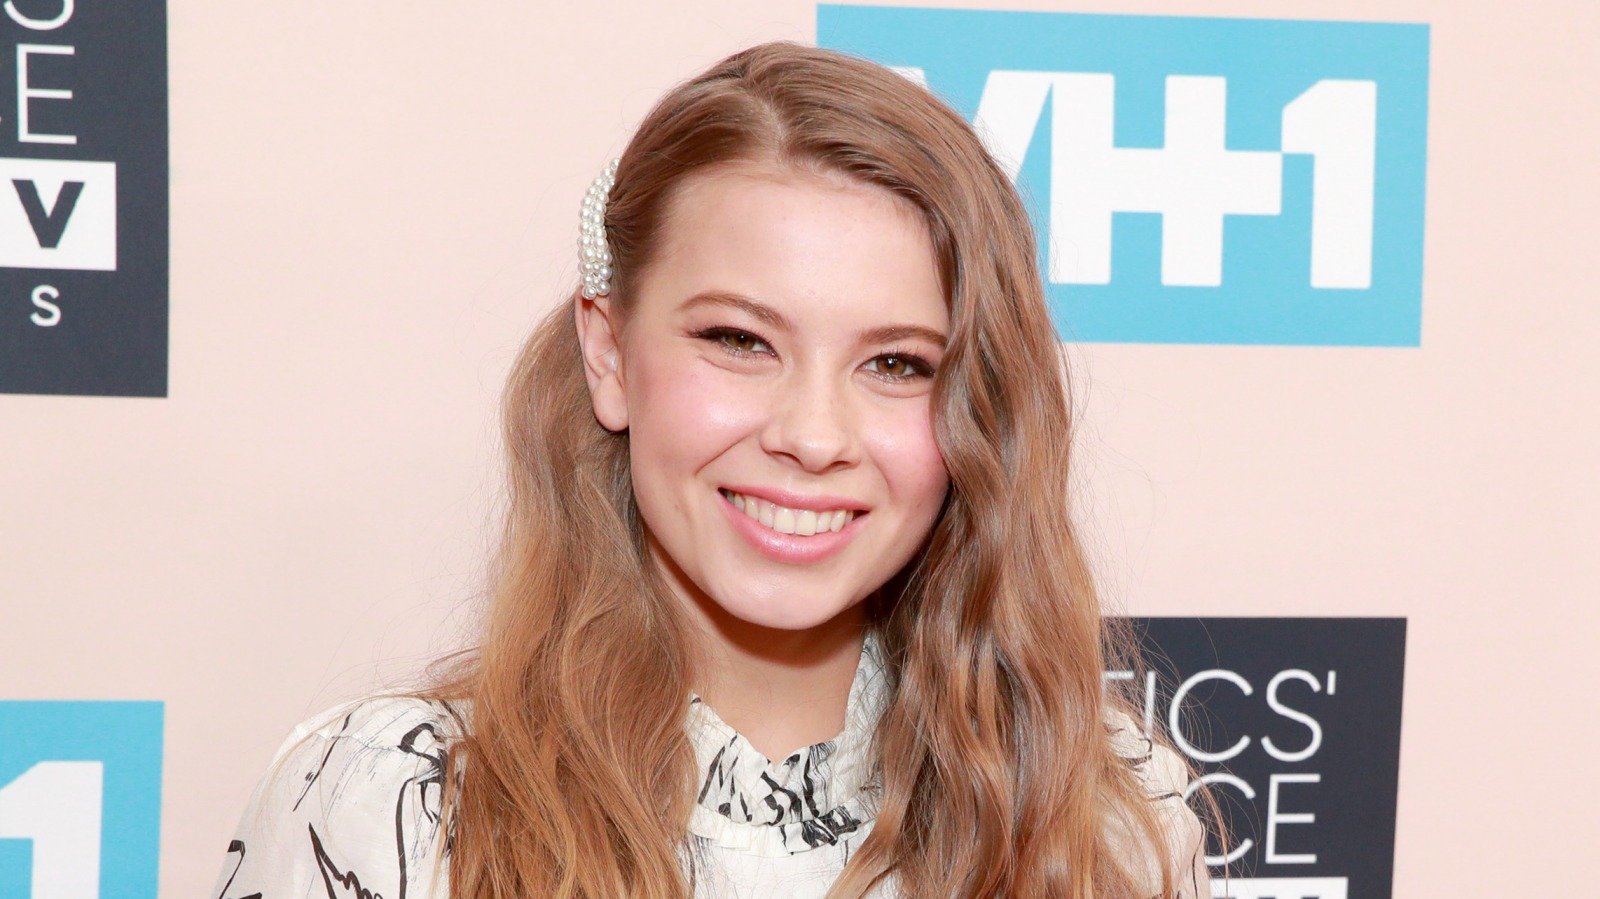 What To Know About Bindi Irwin's Pregnancy